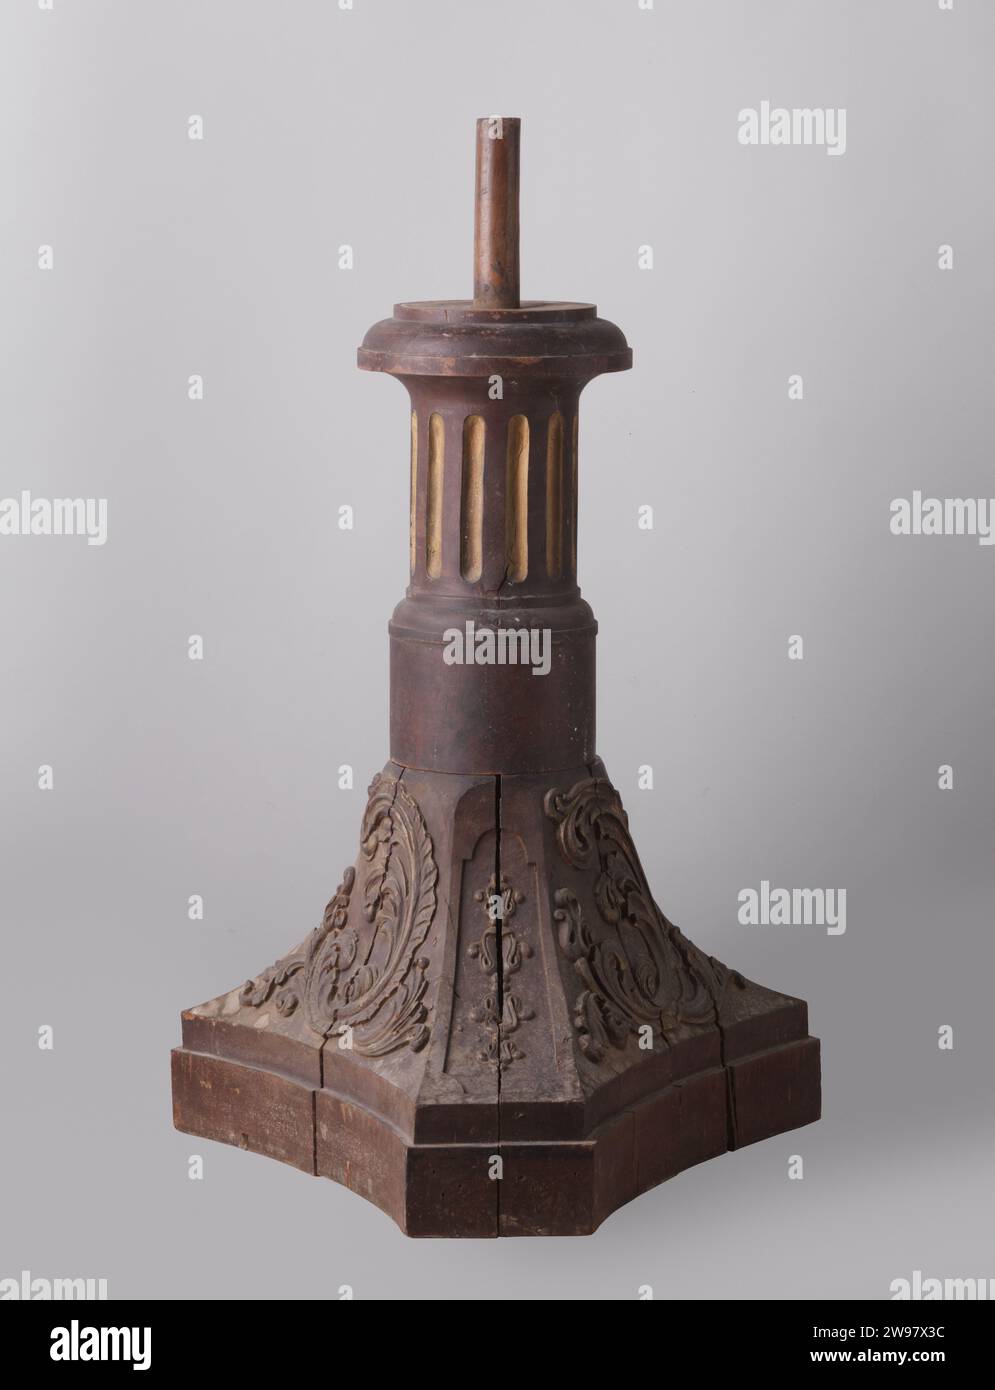 Pedestal, anonymous, c. 1900 - c. 1910  Pedim with eight corners, decorated with praise. Netherlands wood (plant material). iron (metal)   Netherlands Stock Photo